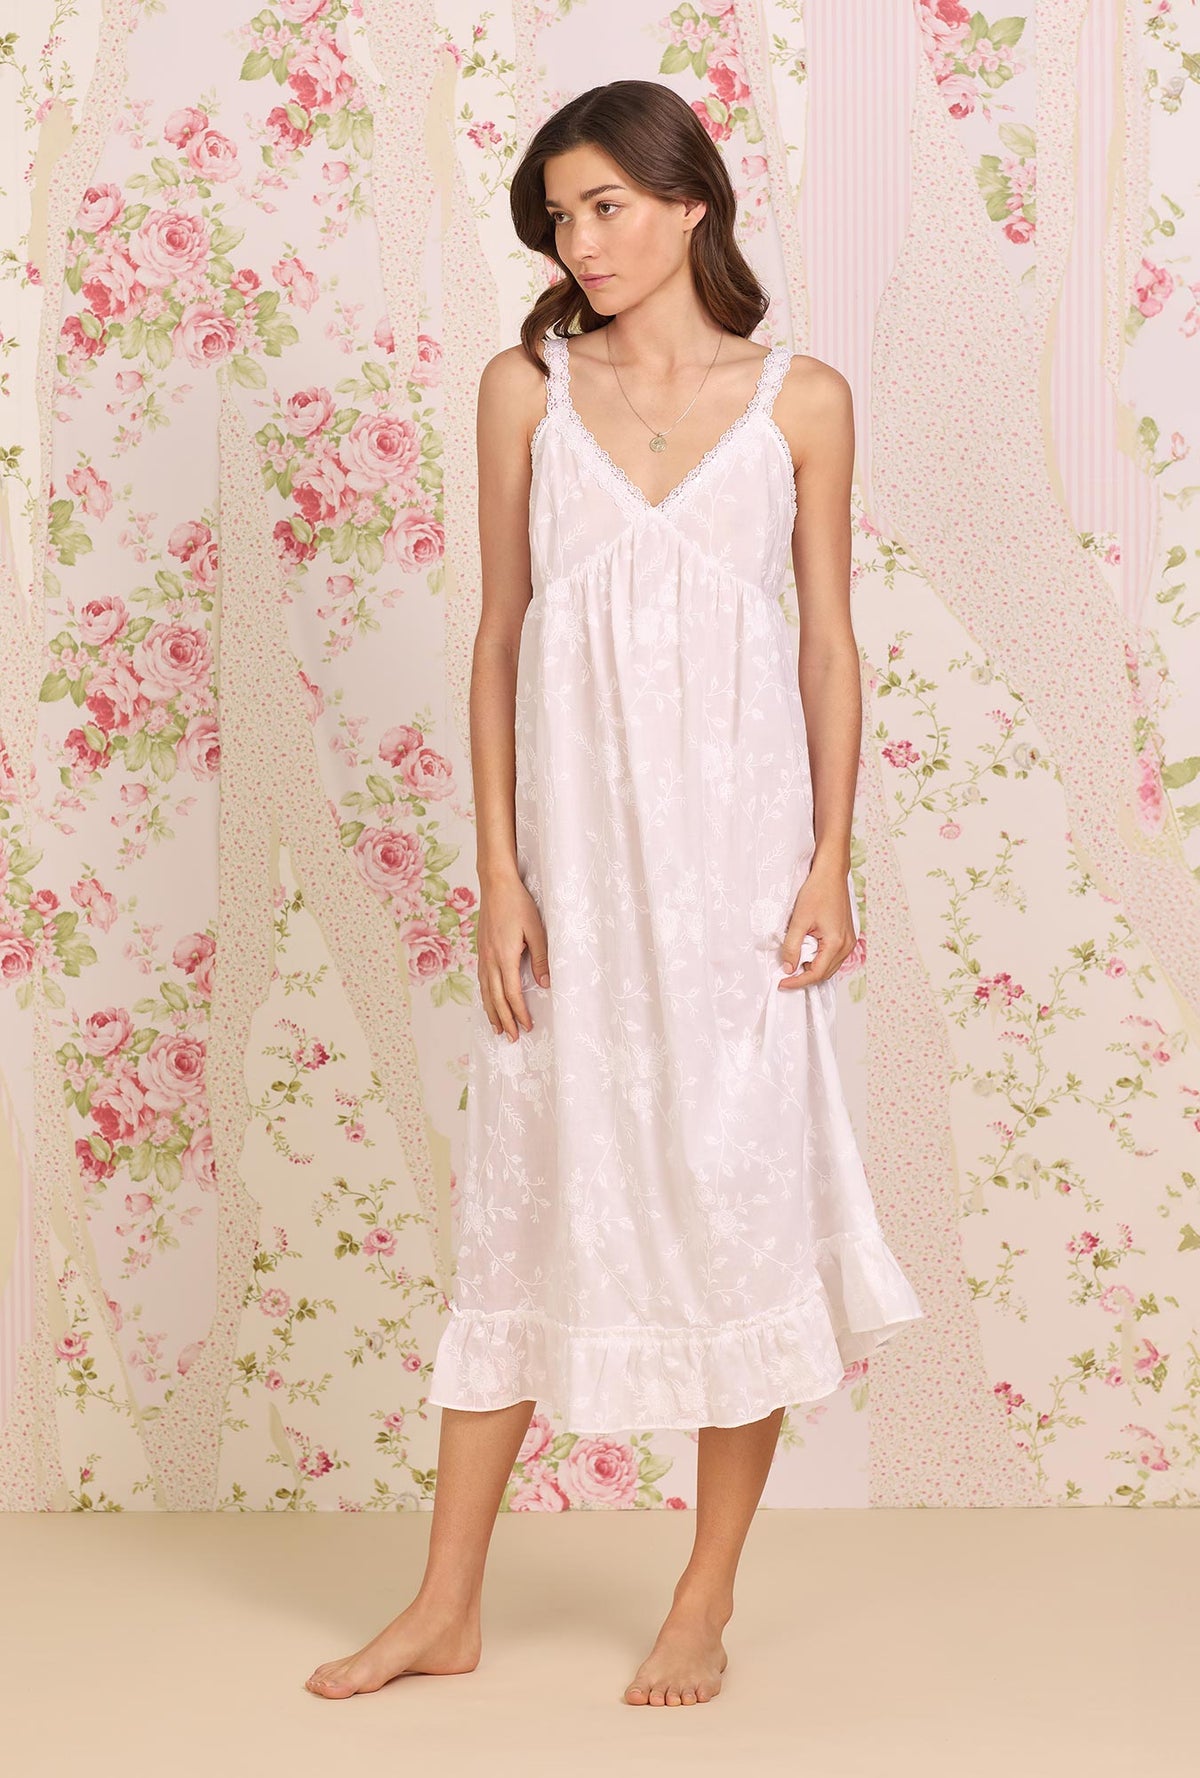 A lady wearing white sleeveless Cotton Nightgown with Dreamy Embroidered print